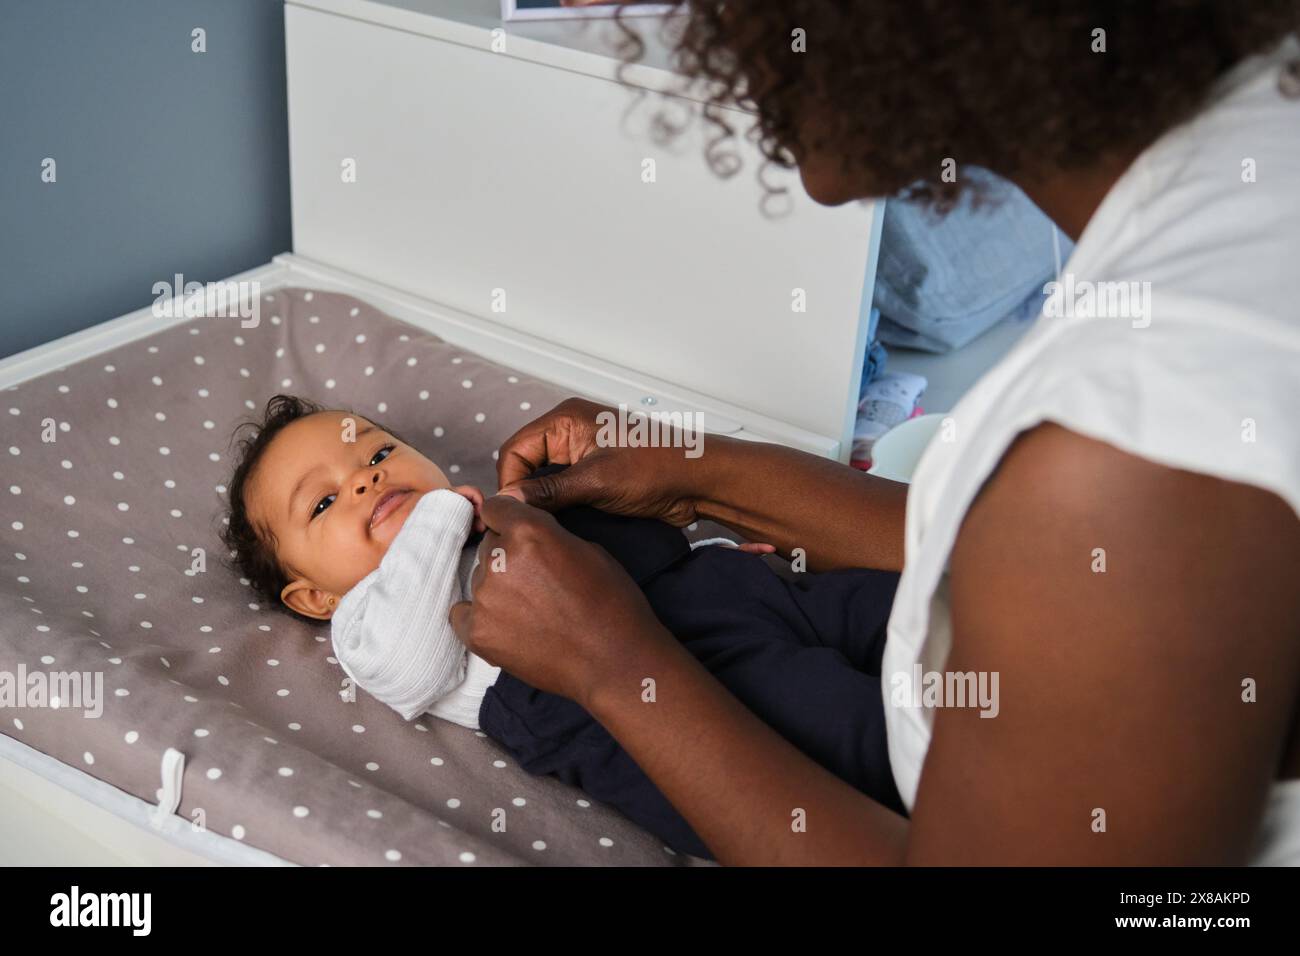 African mother is dressing up her baby girl on a changing table. Stock Photo